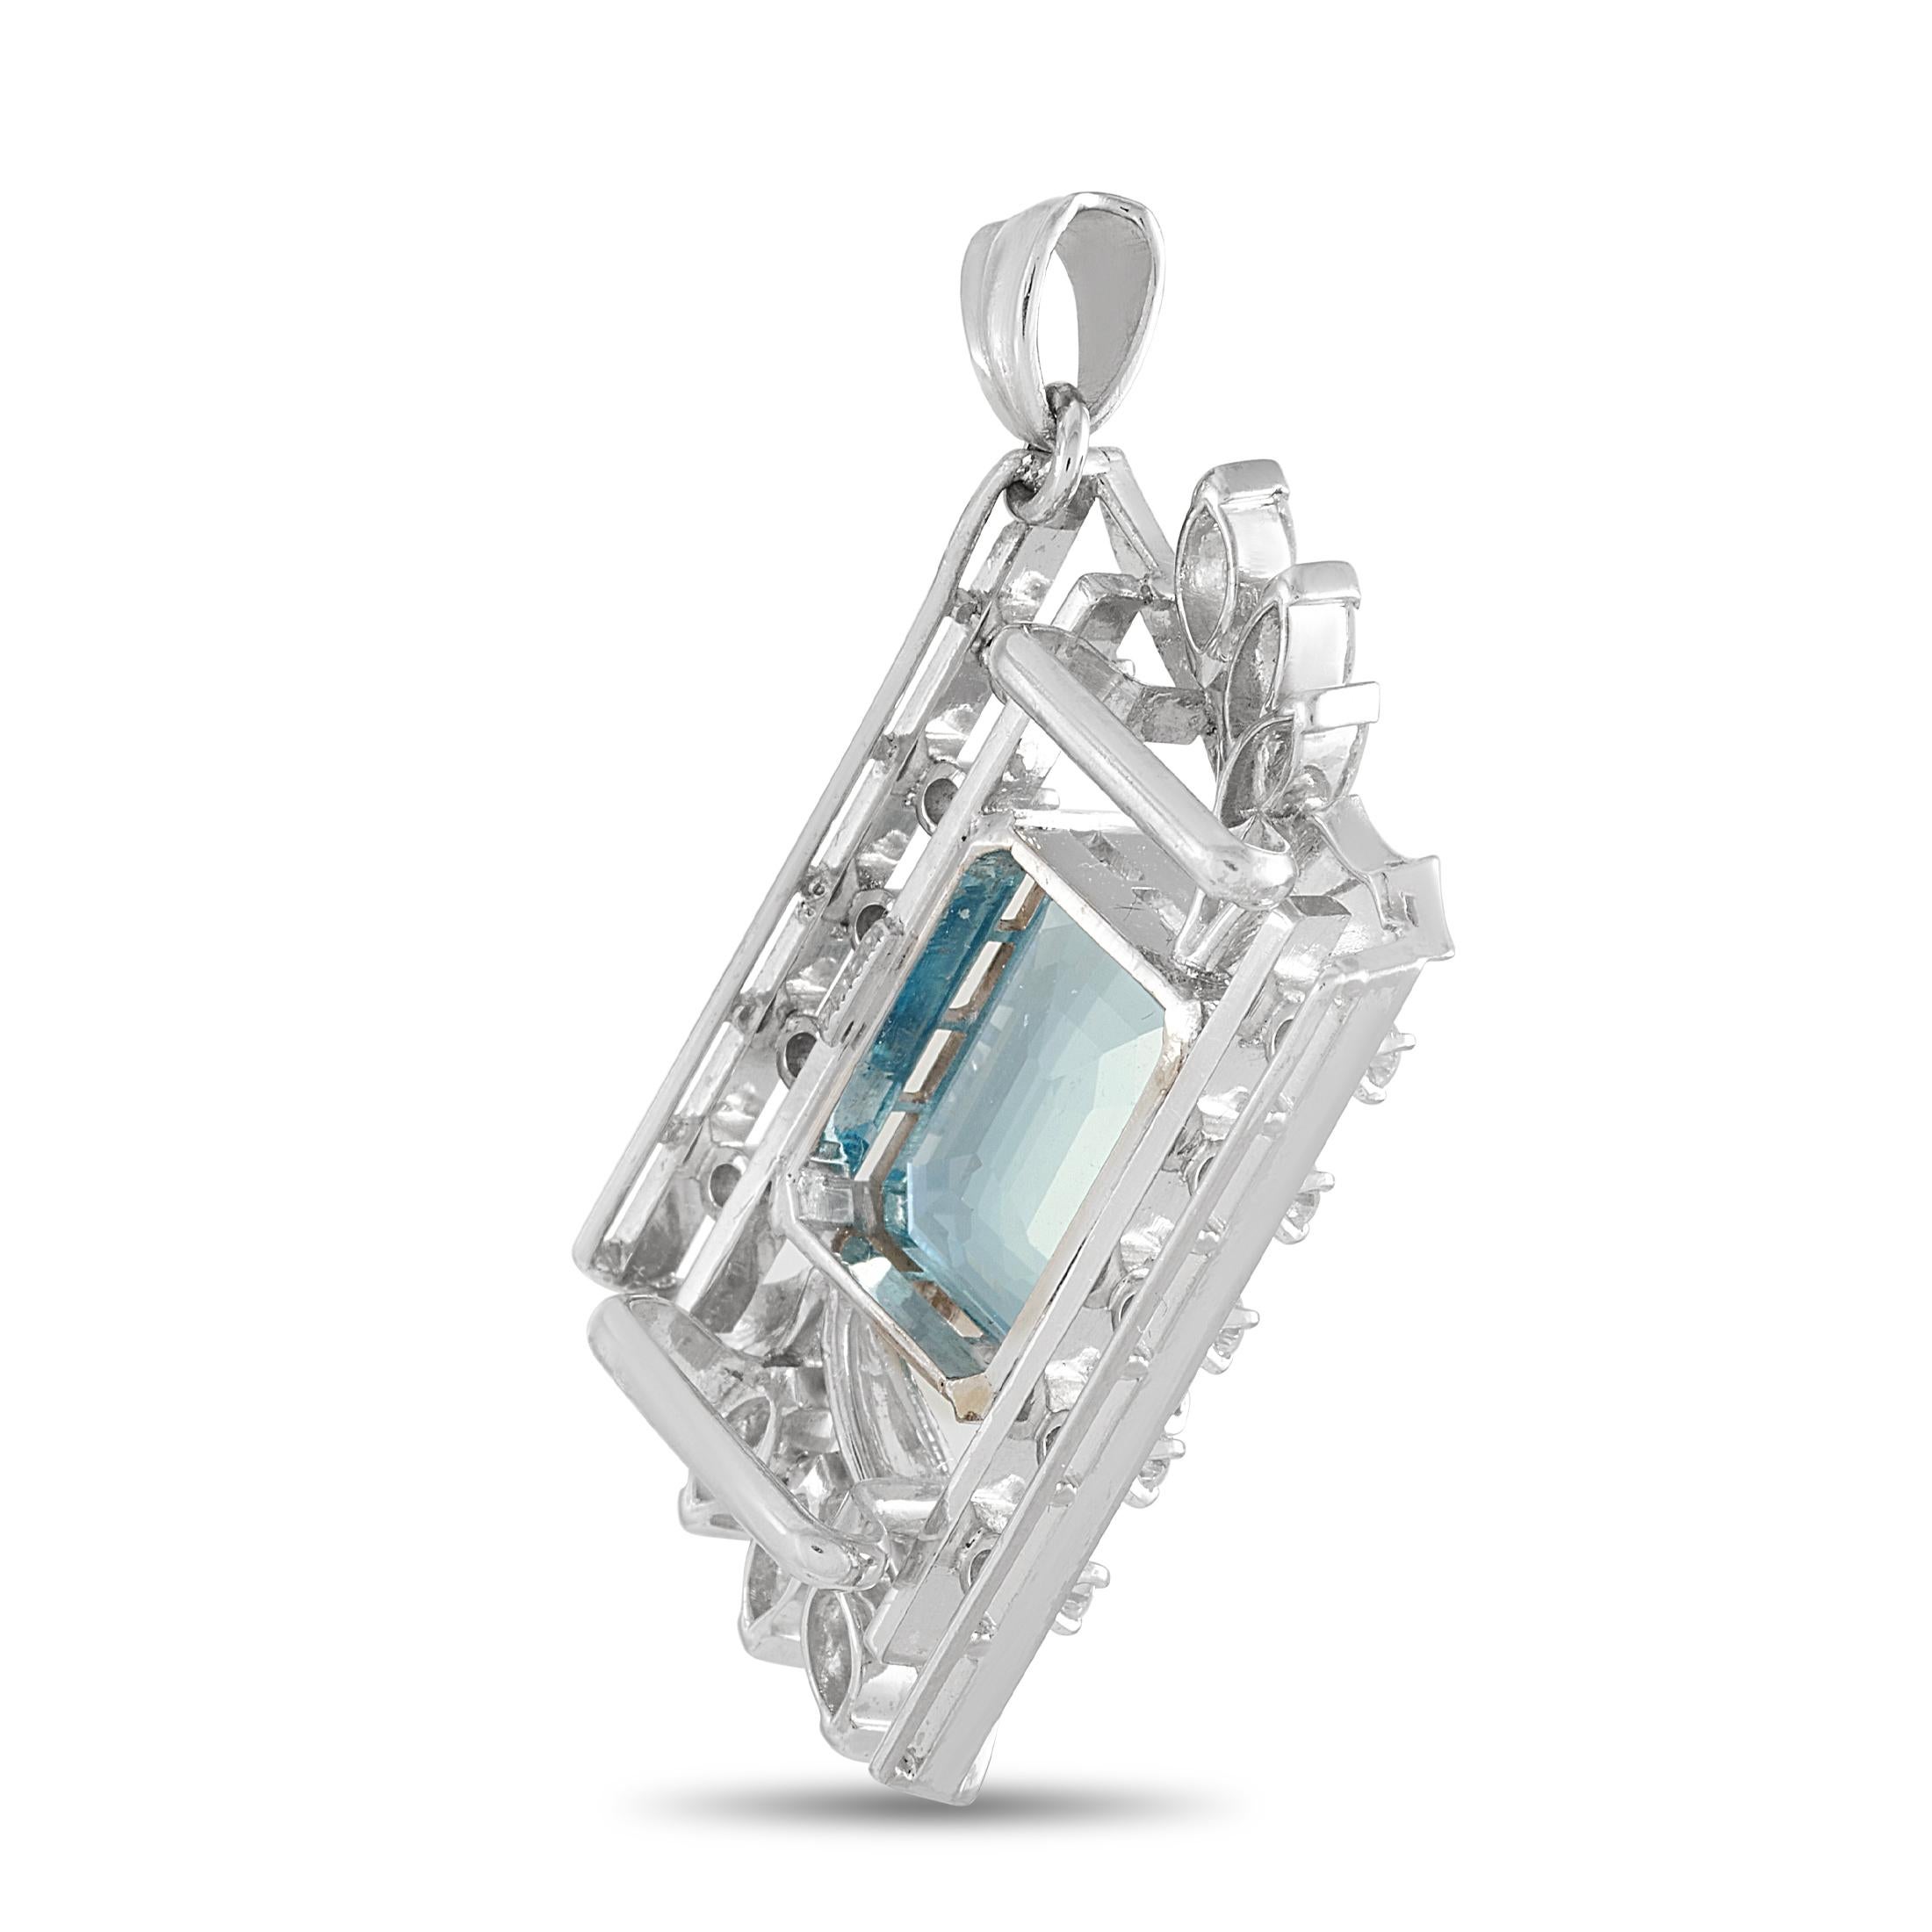 This LB Exclusive pendant is crafted from platinum and weighs 9.5 grams. It measures 1.50” in length and 0.75” in width. The pendant is set with a 6.73 ct aquamarine and a total of 0.85 carats of diamonds.
 
 Offered in estate condition, this item